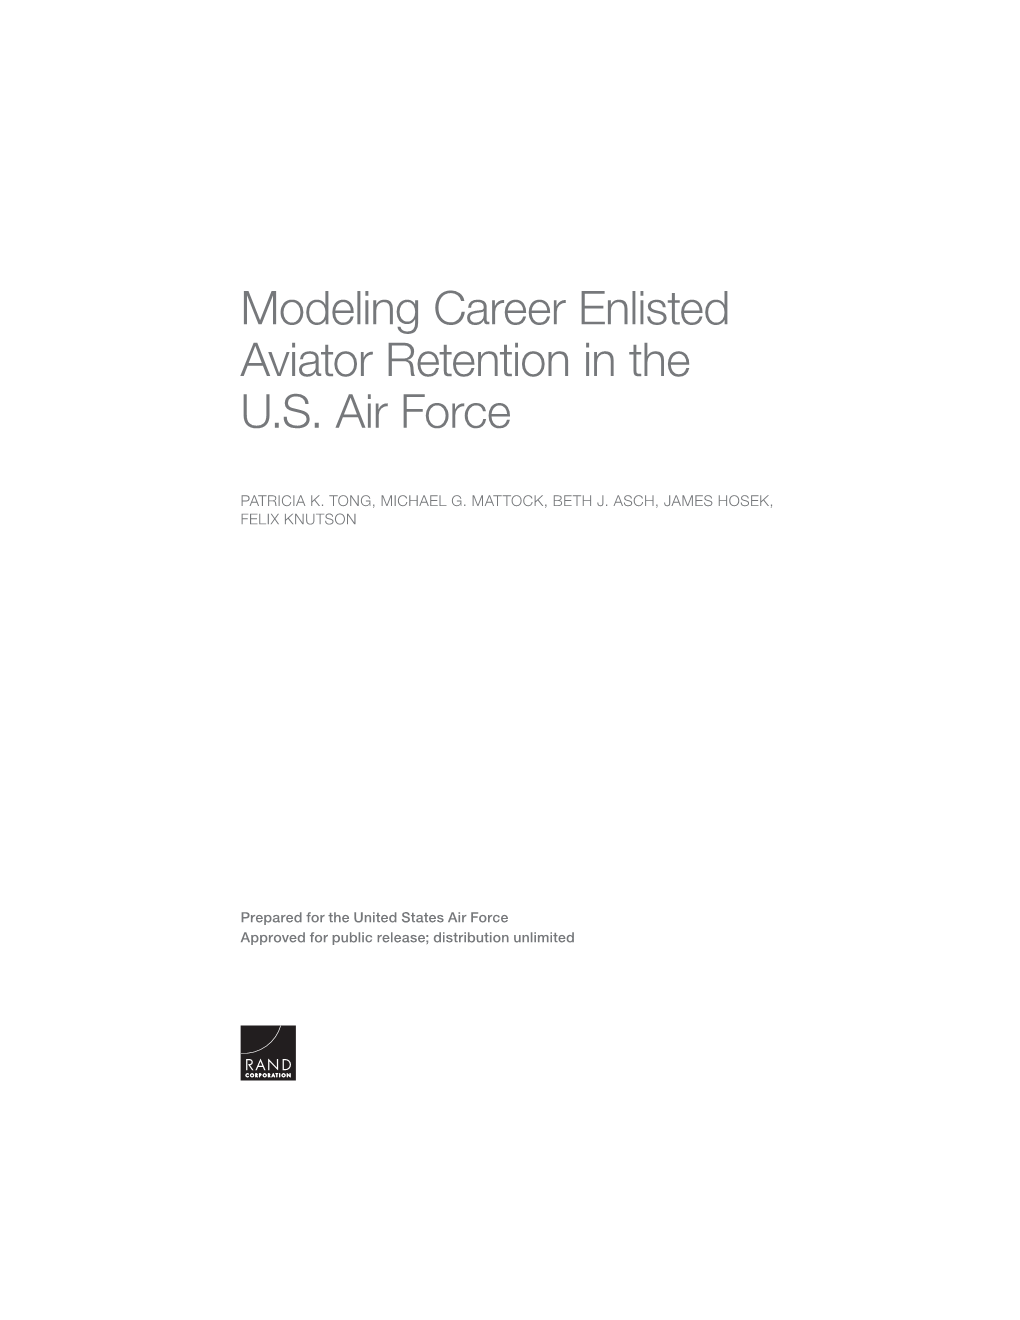 Modeling Career Enlisted Aviator Retention in the U.S. Air Force